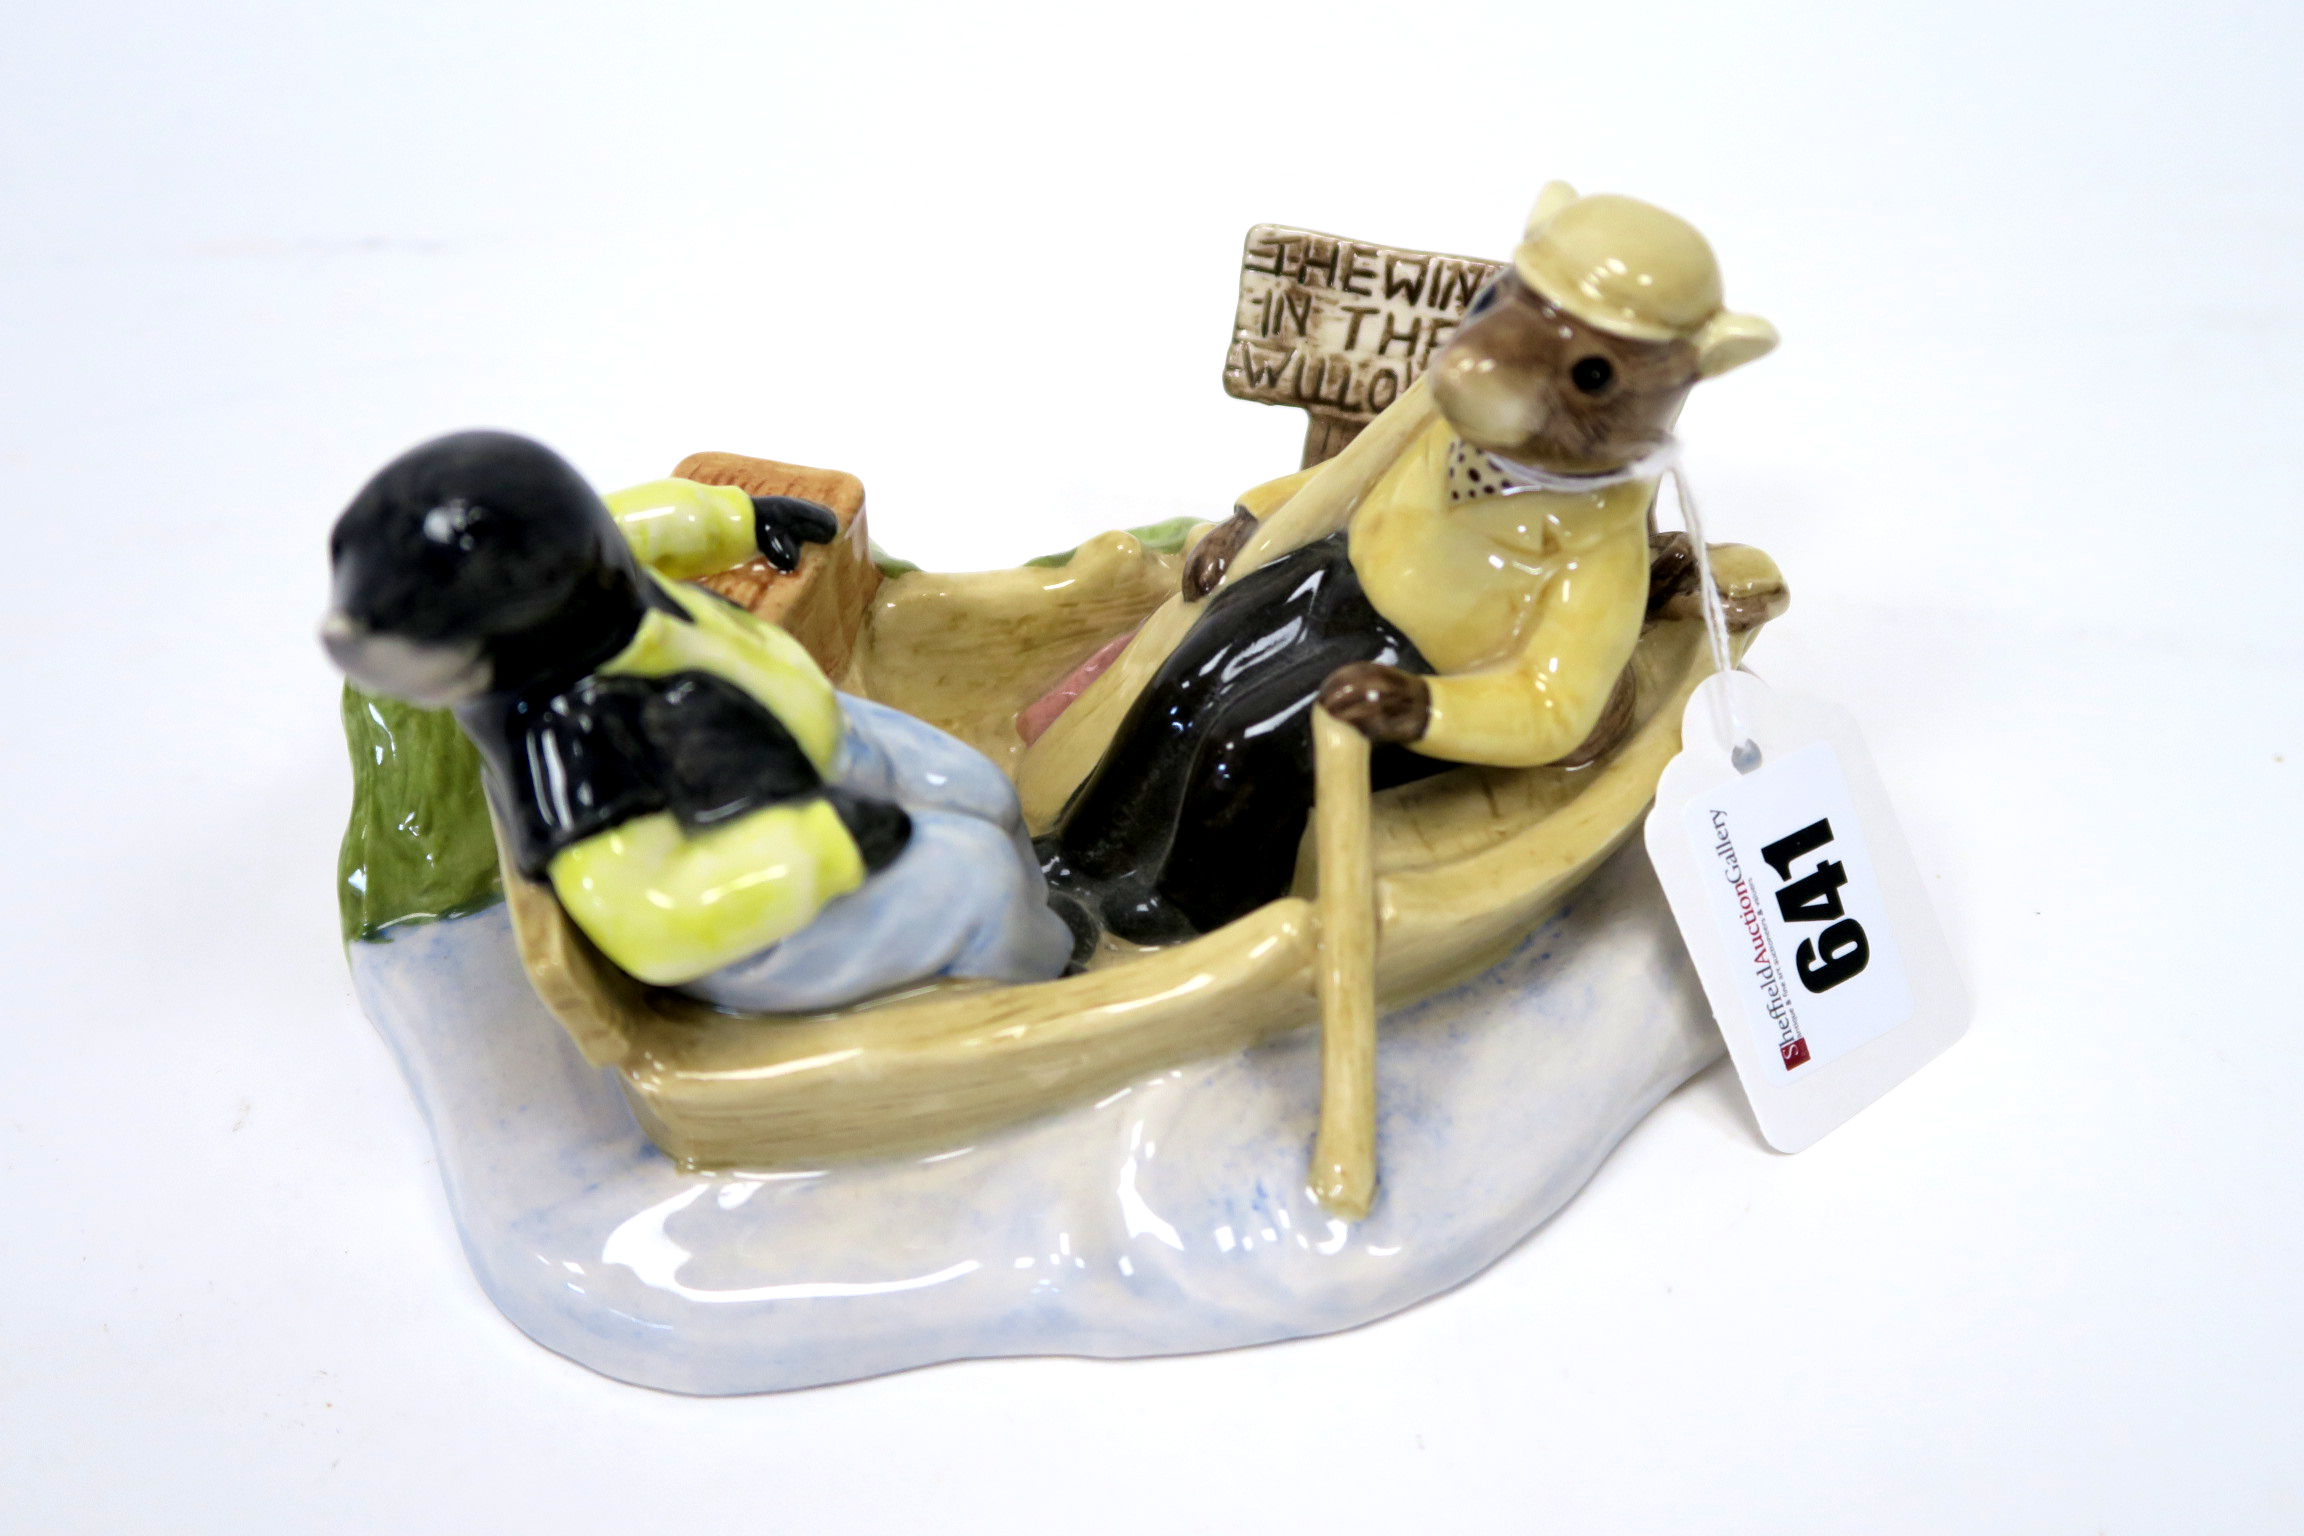 A Beswick Pottery "The Wind in the Willows on the River" Figure, number 596 of a limited edition